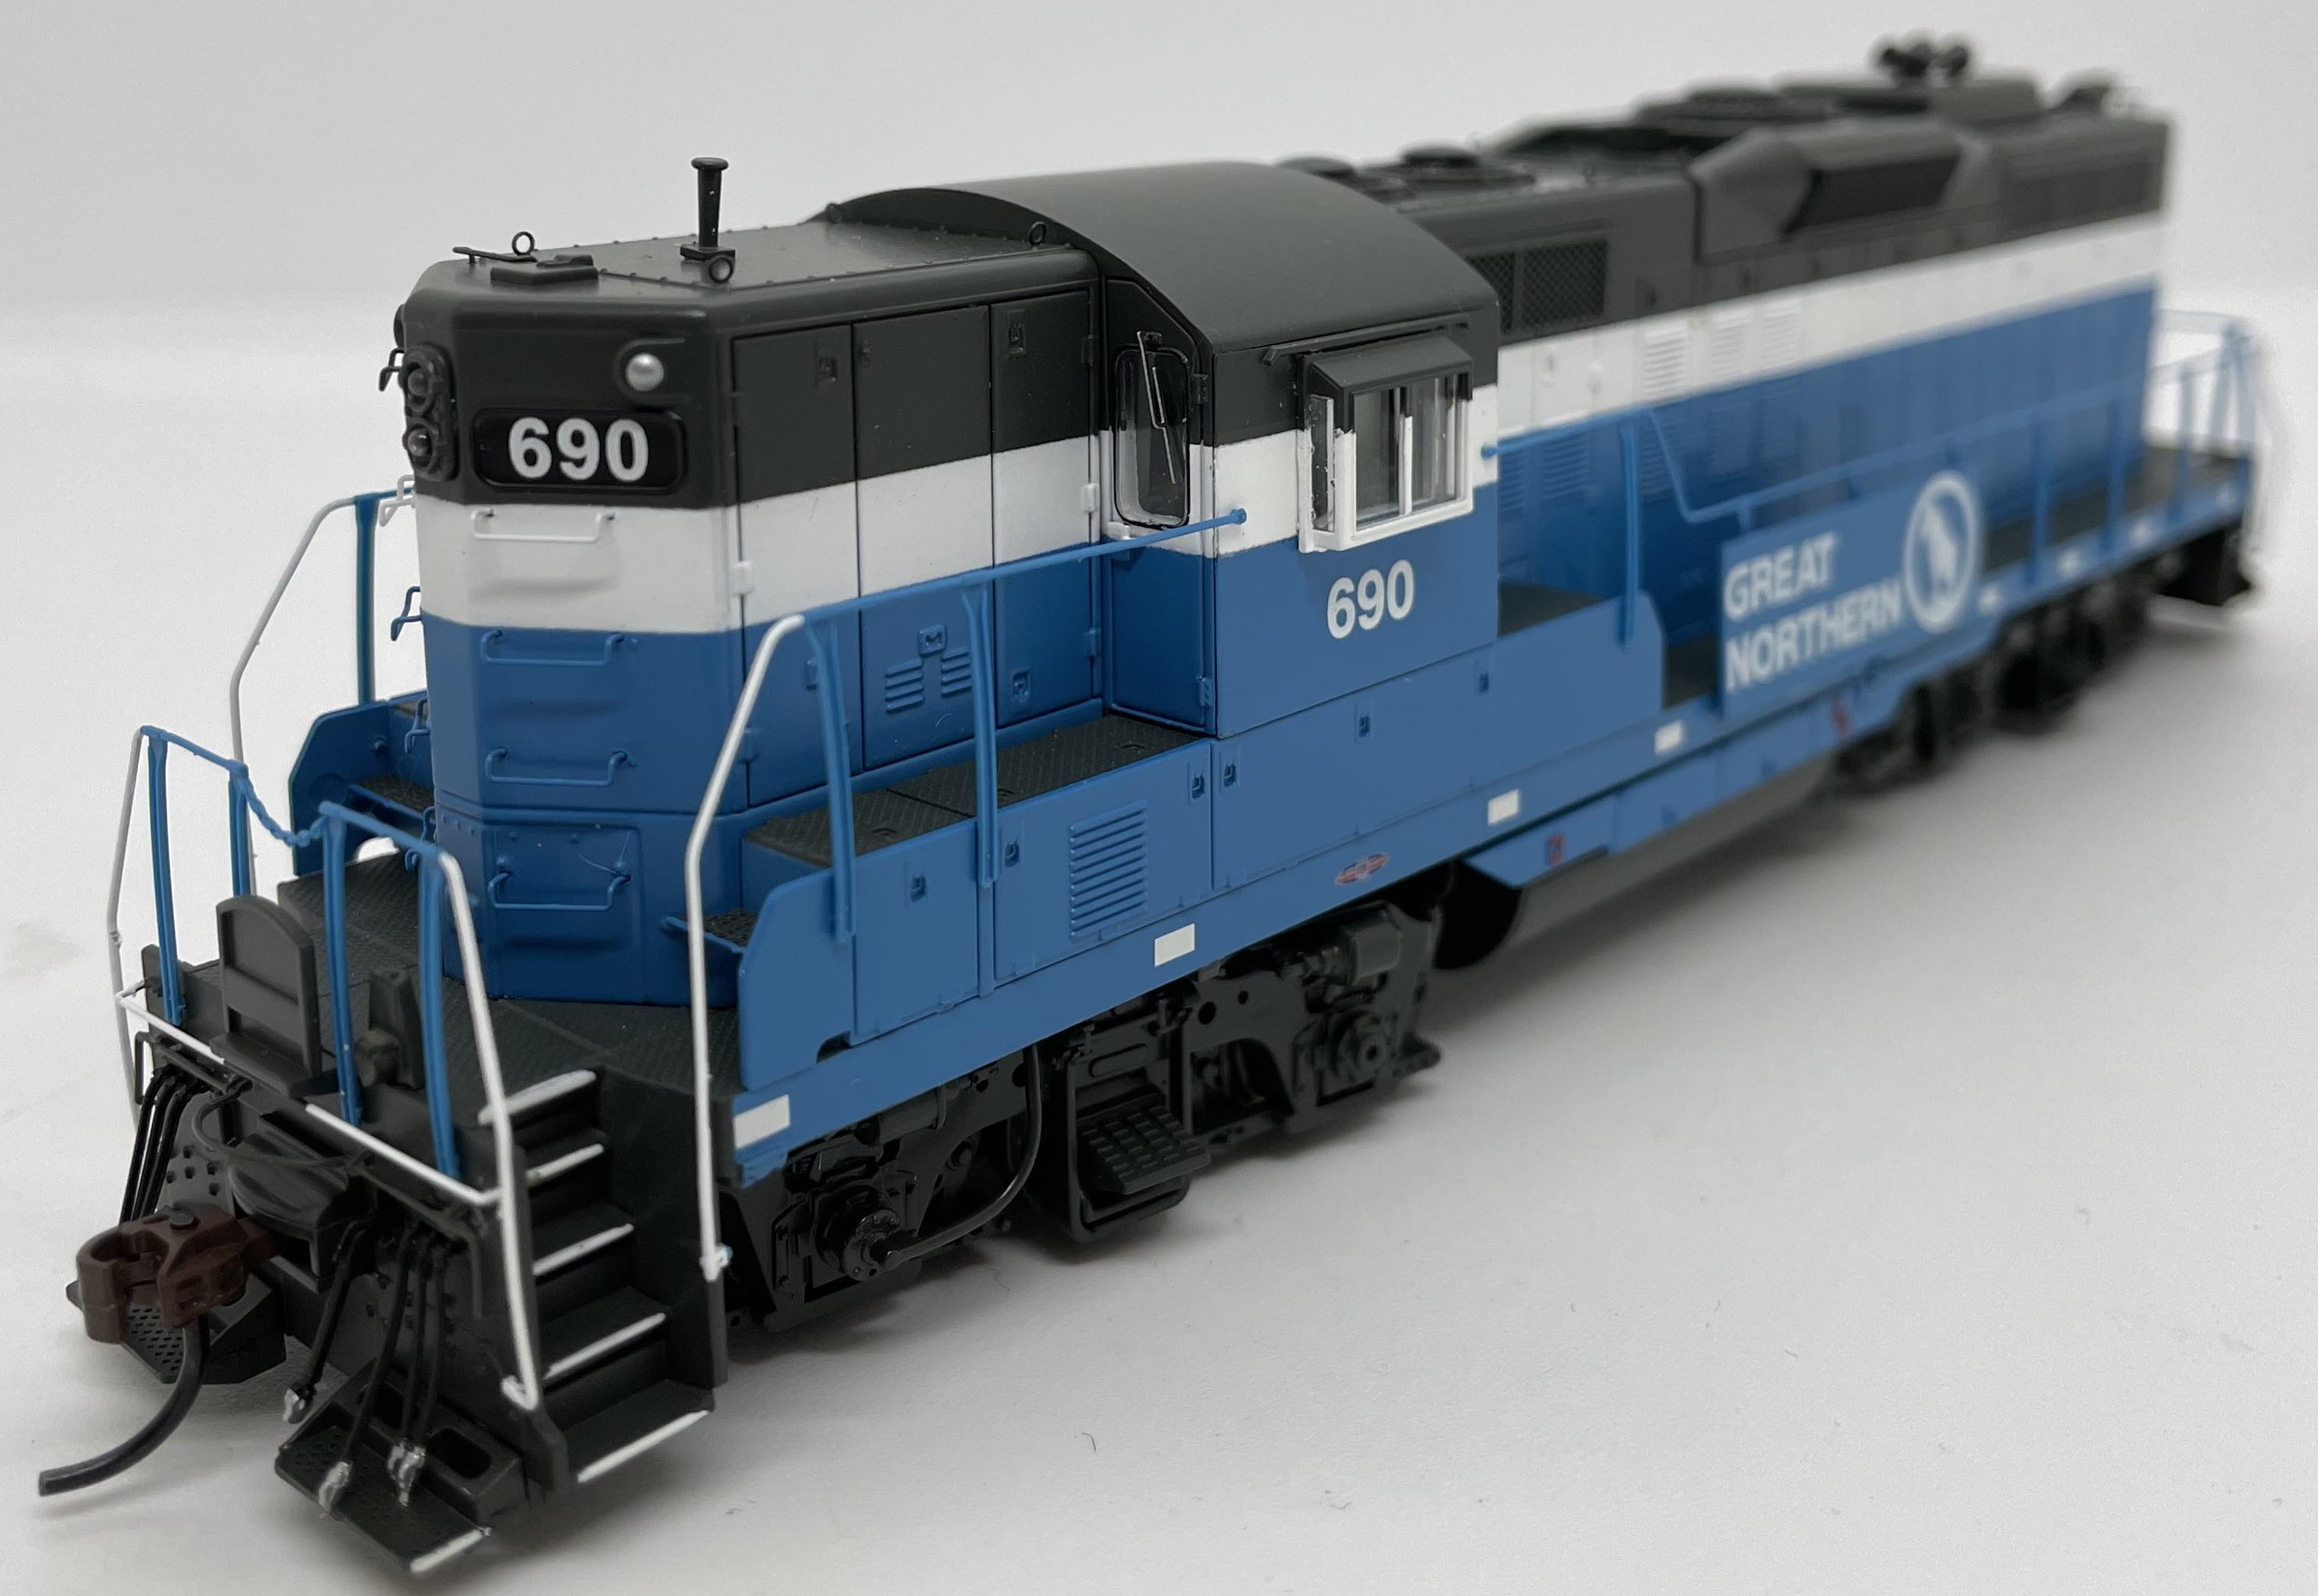 Athearn Genesis G82383 - HO GP9 - DCC & Sound - Great Northern #690